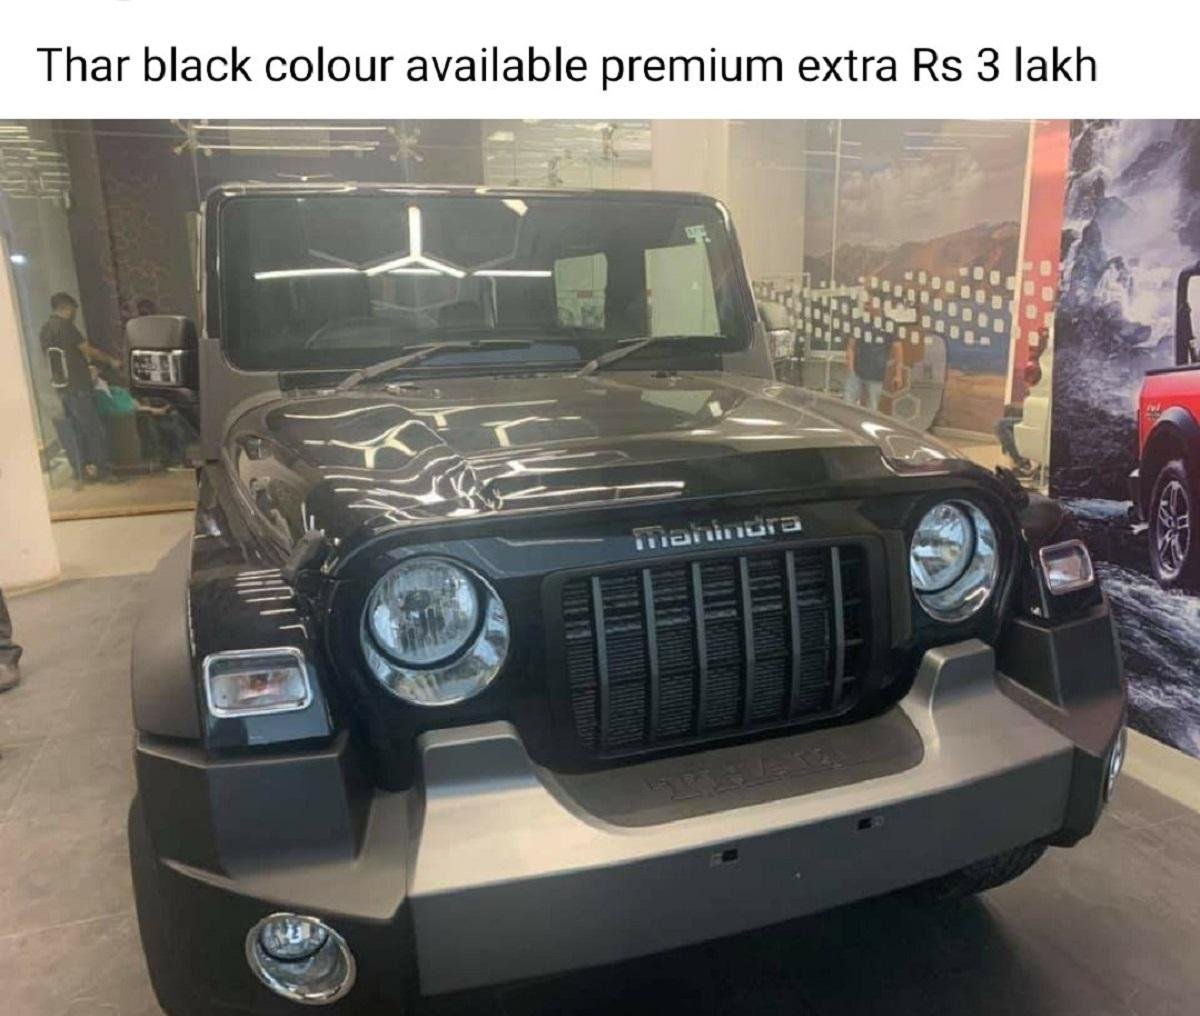 Dealers Charging Premium of Around Rs. 3 Lakh for Mahindra Thar Napoli Black